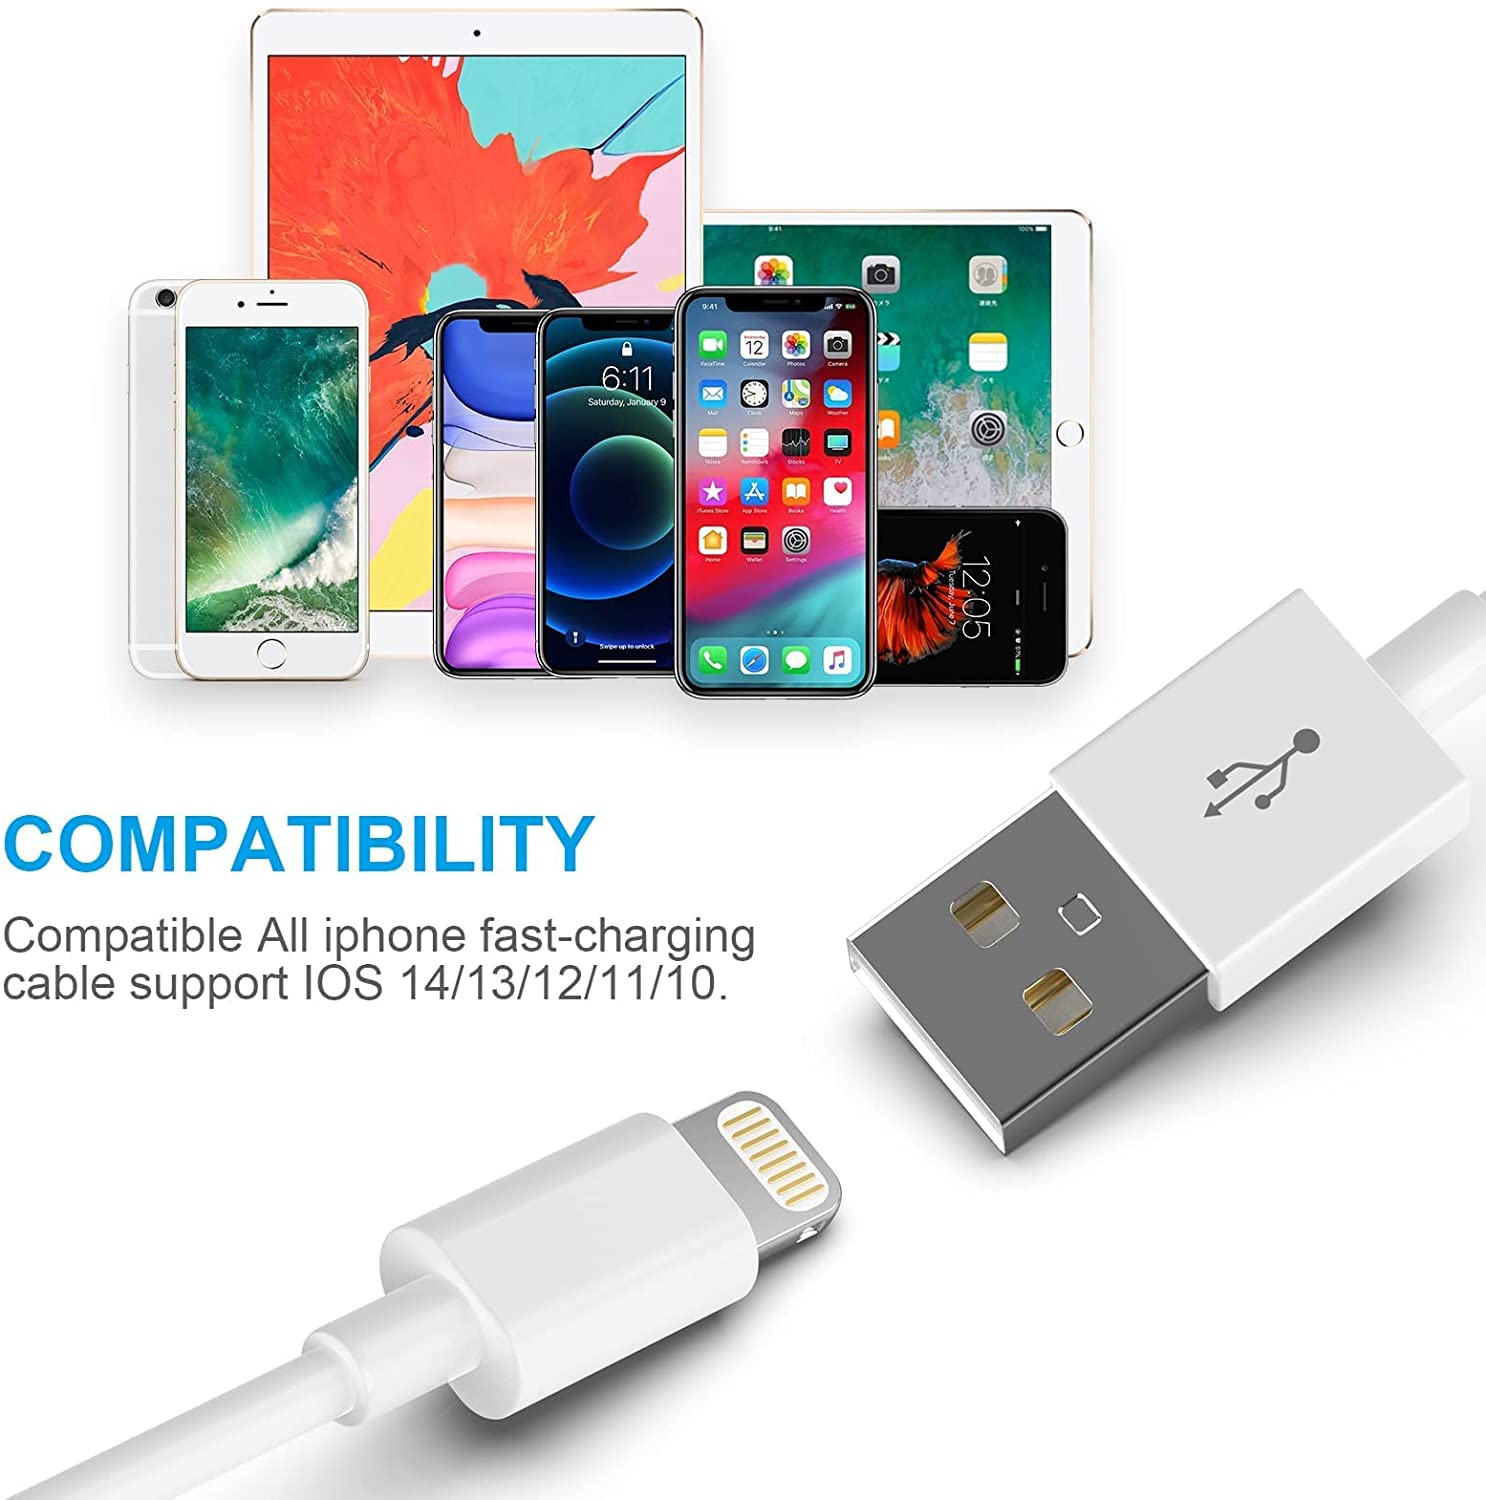 Charging Cable Compatibility Poster